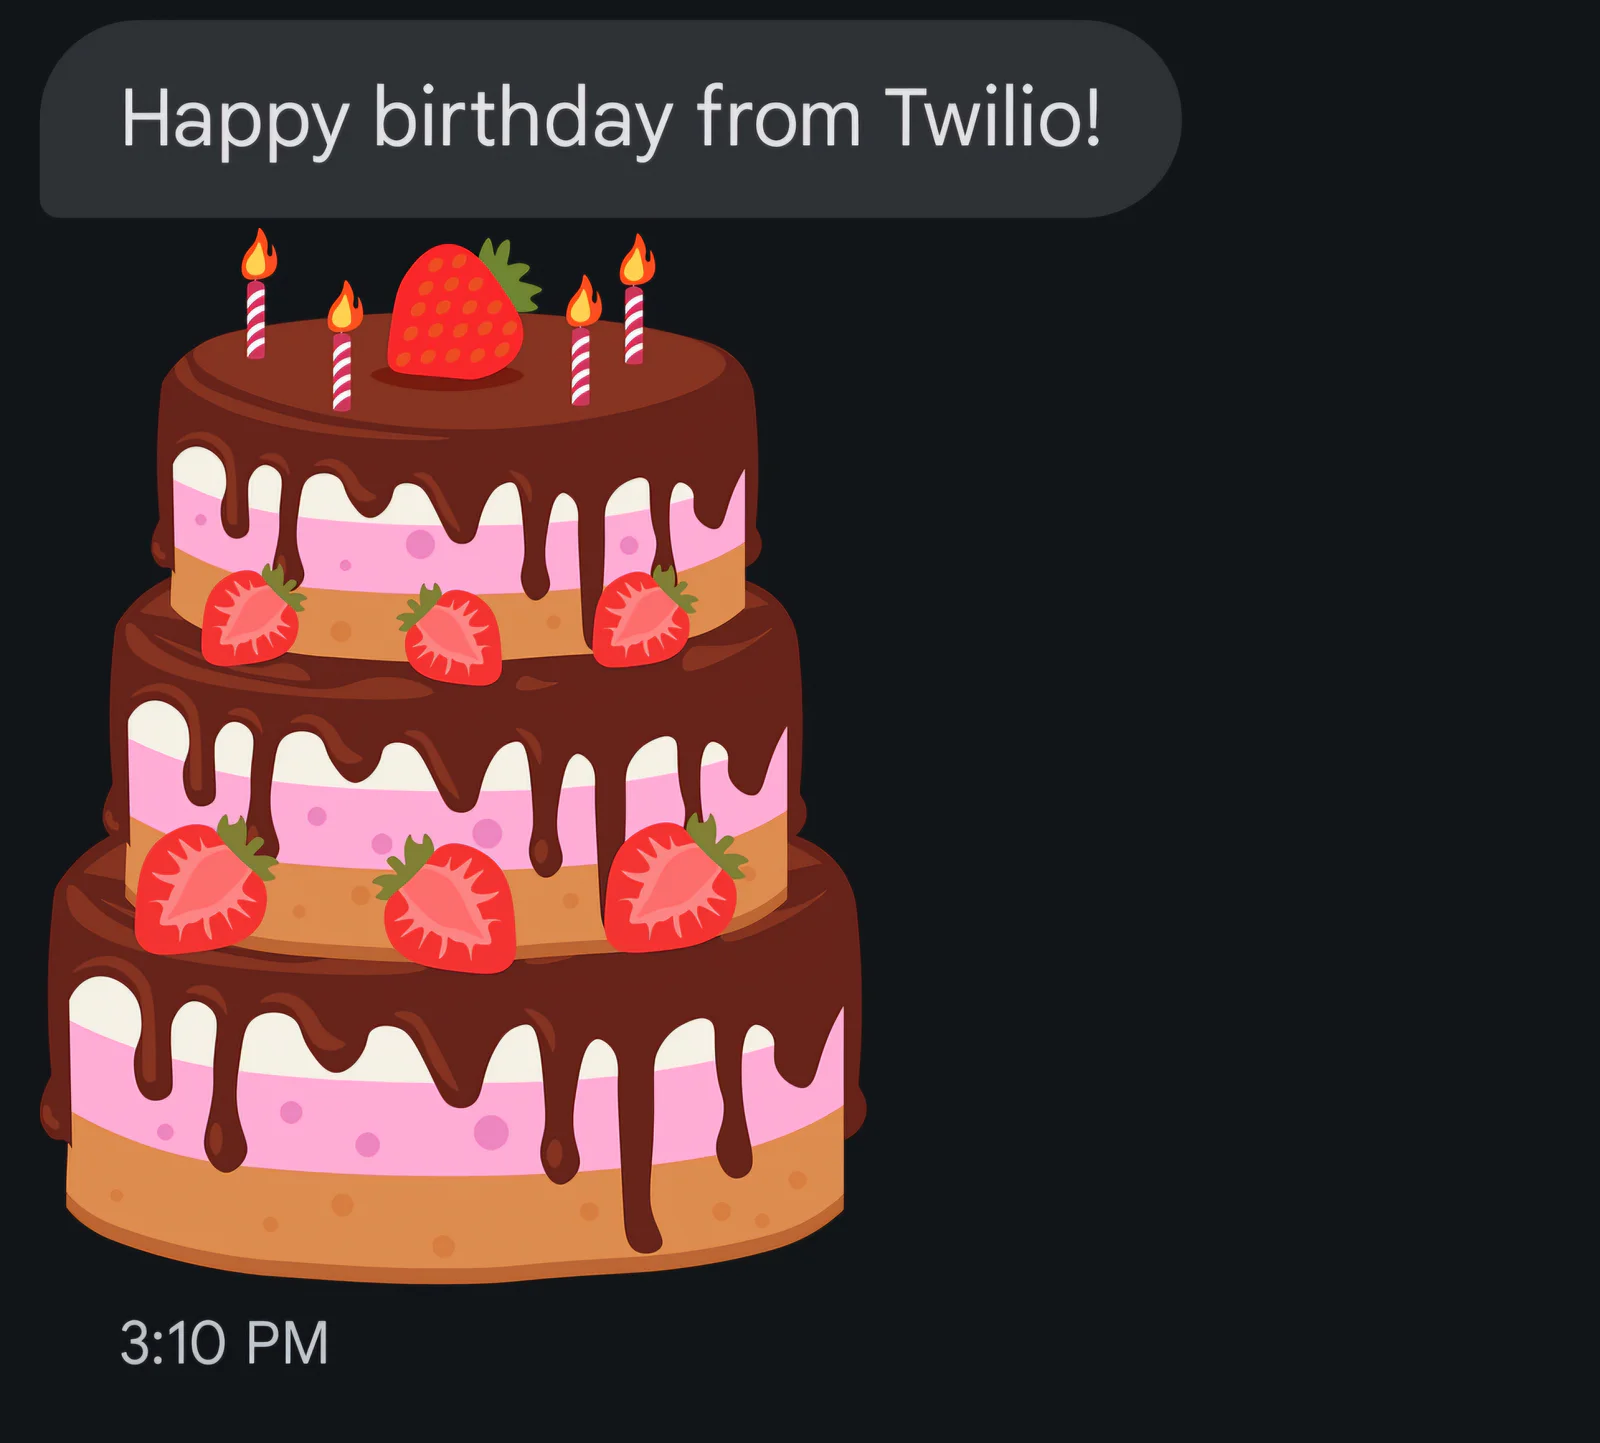 Final result of text. It says "Happy birthday from Twilio" and shows a cake picture